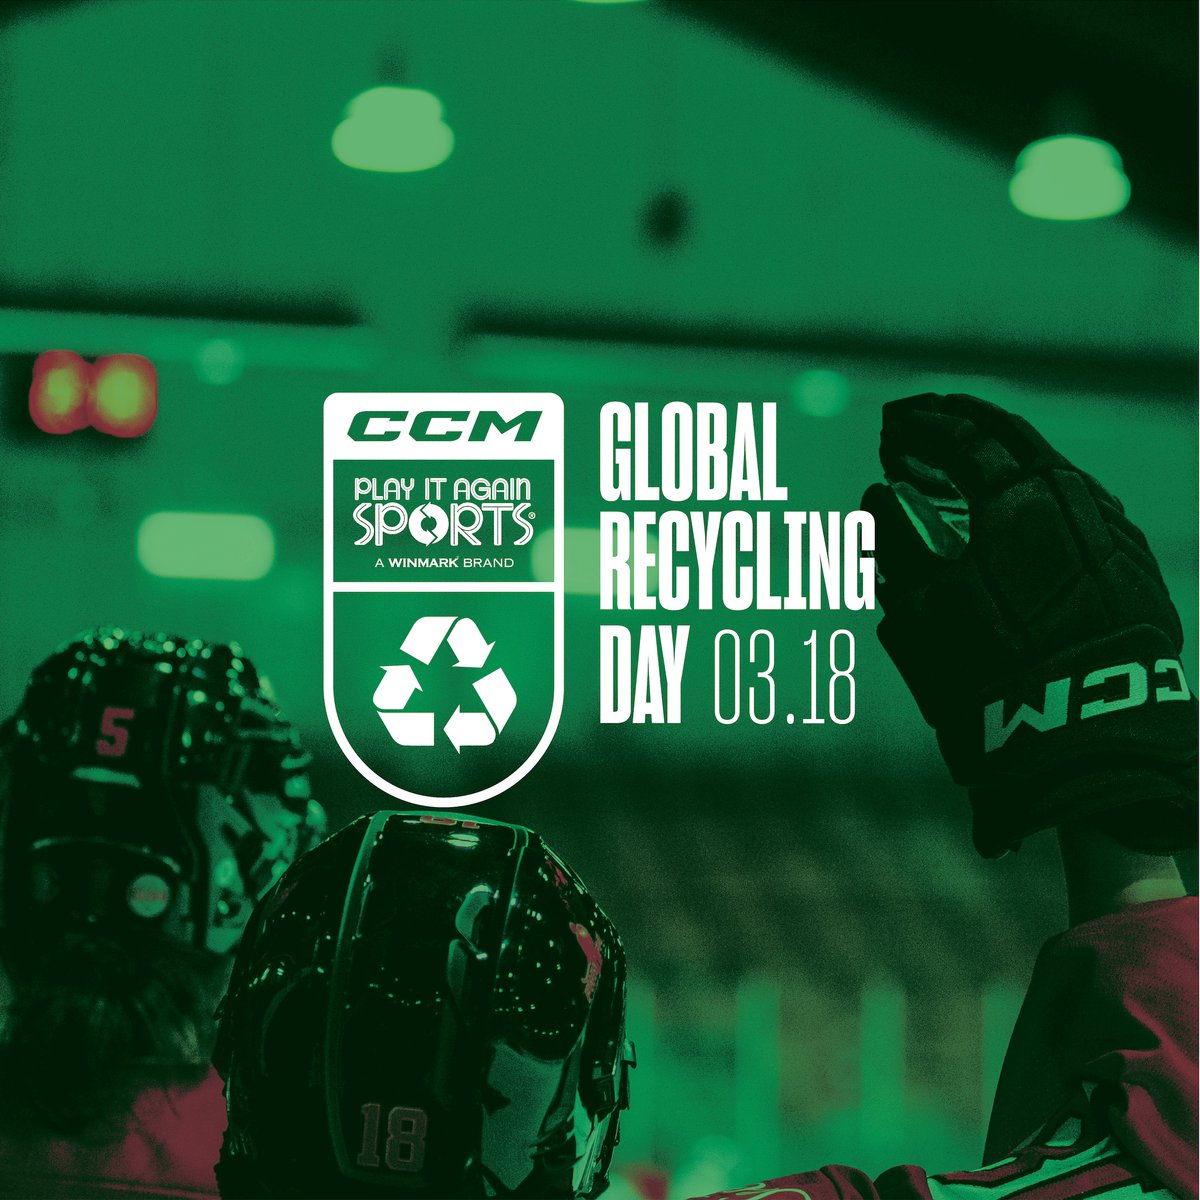 Happy Global Recycling Day to all of the athletes helping to keep sports gear in play and out of landfills! Join us and @PlayItAgainSports in the movement towards a greener, more sustainable future, one recycled item at a time. #globalrecyclingday